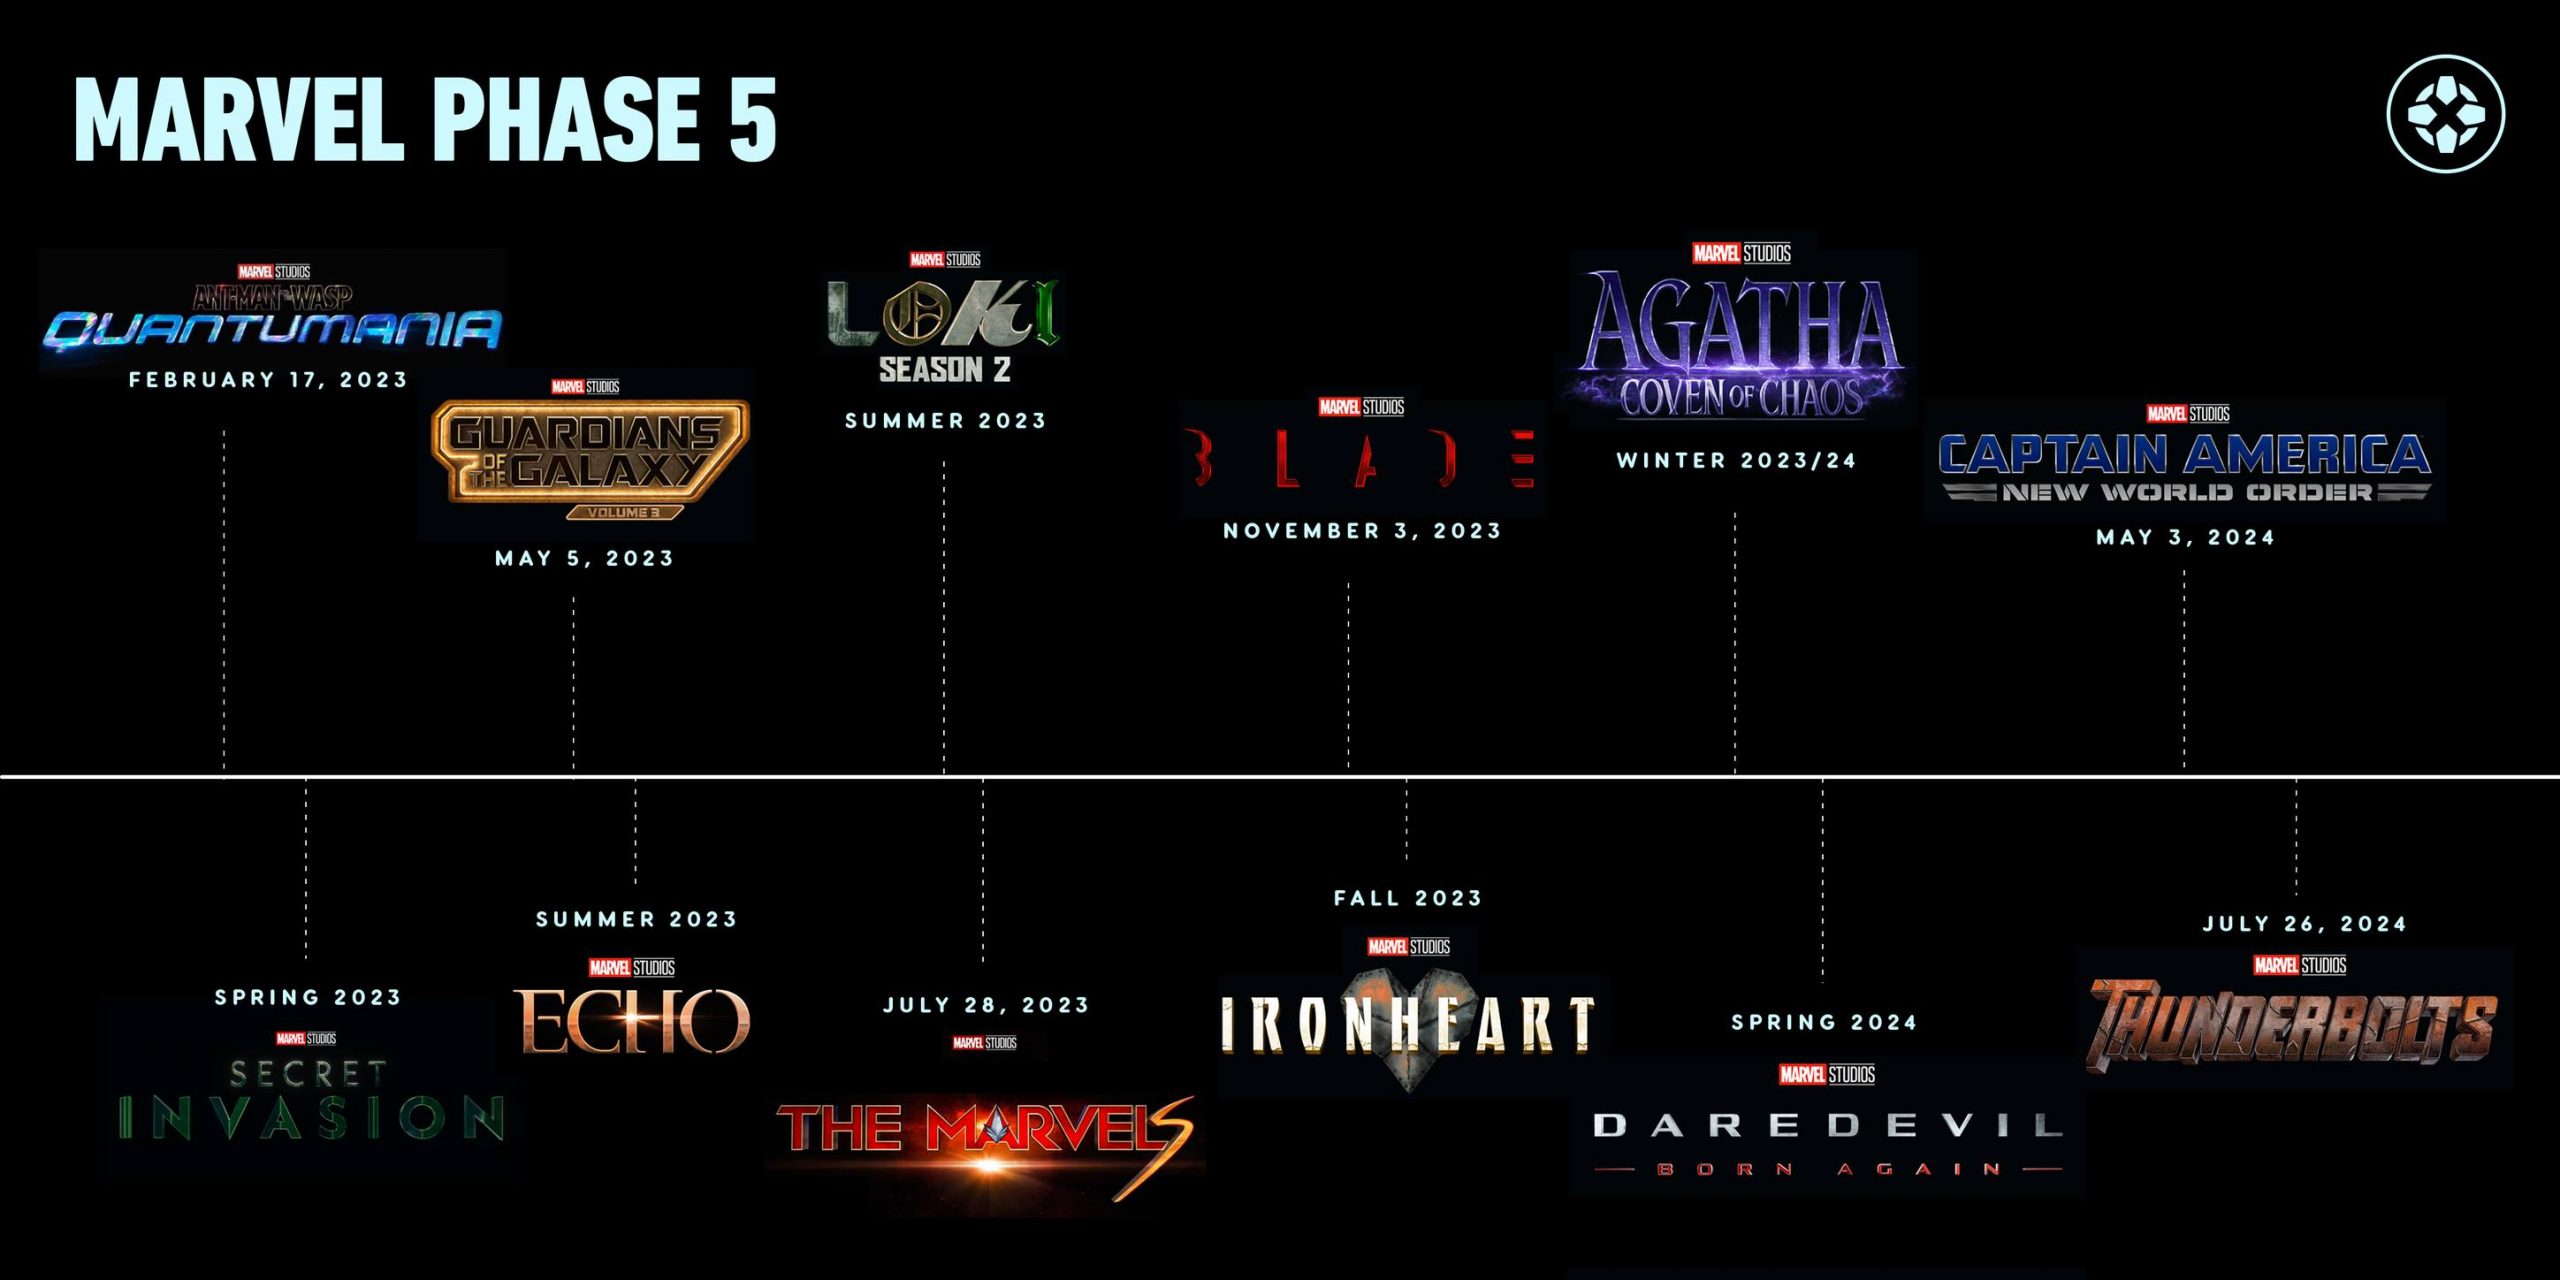 Marvel Studios reveals Phase 5 The Multiverse Saga. But will